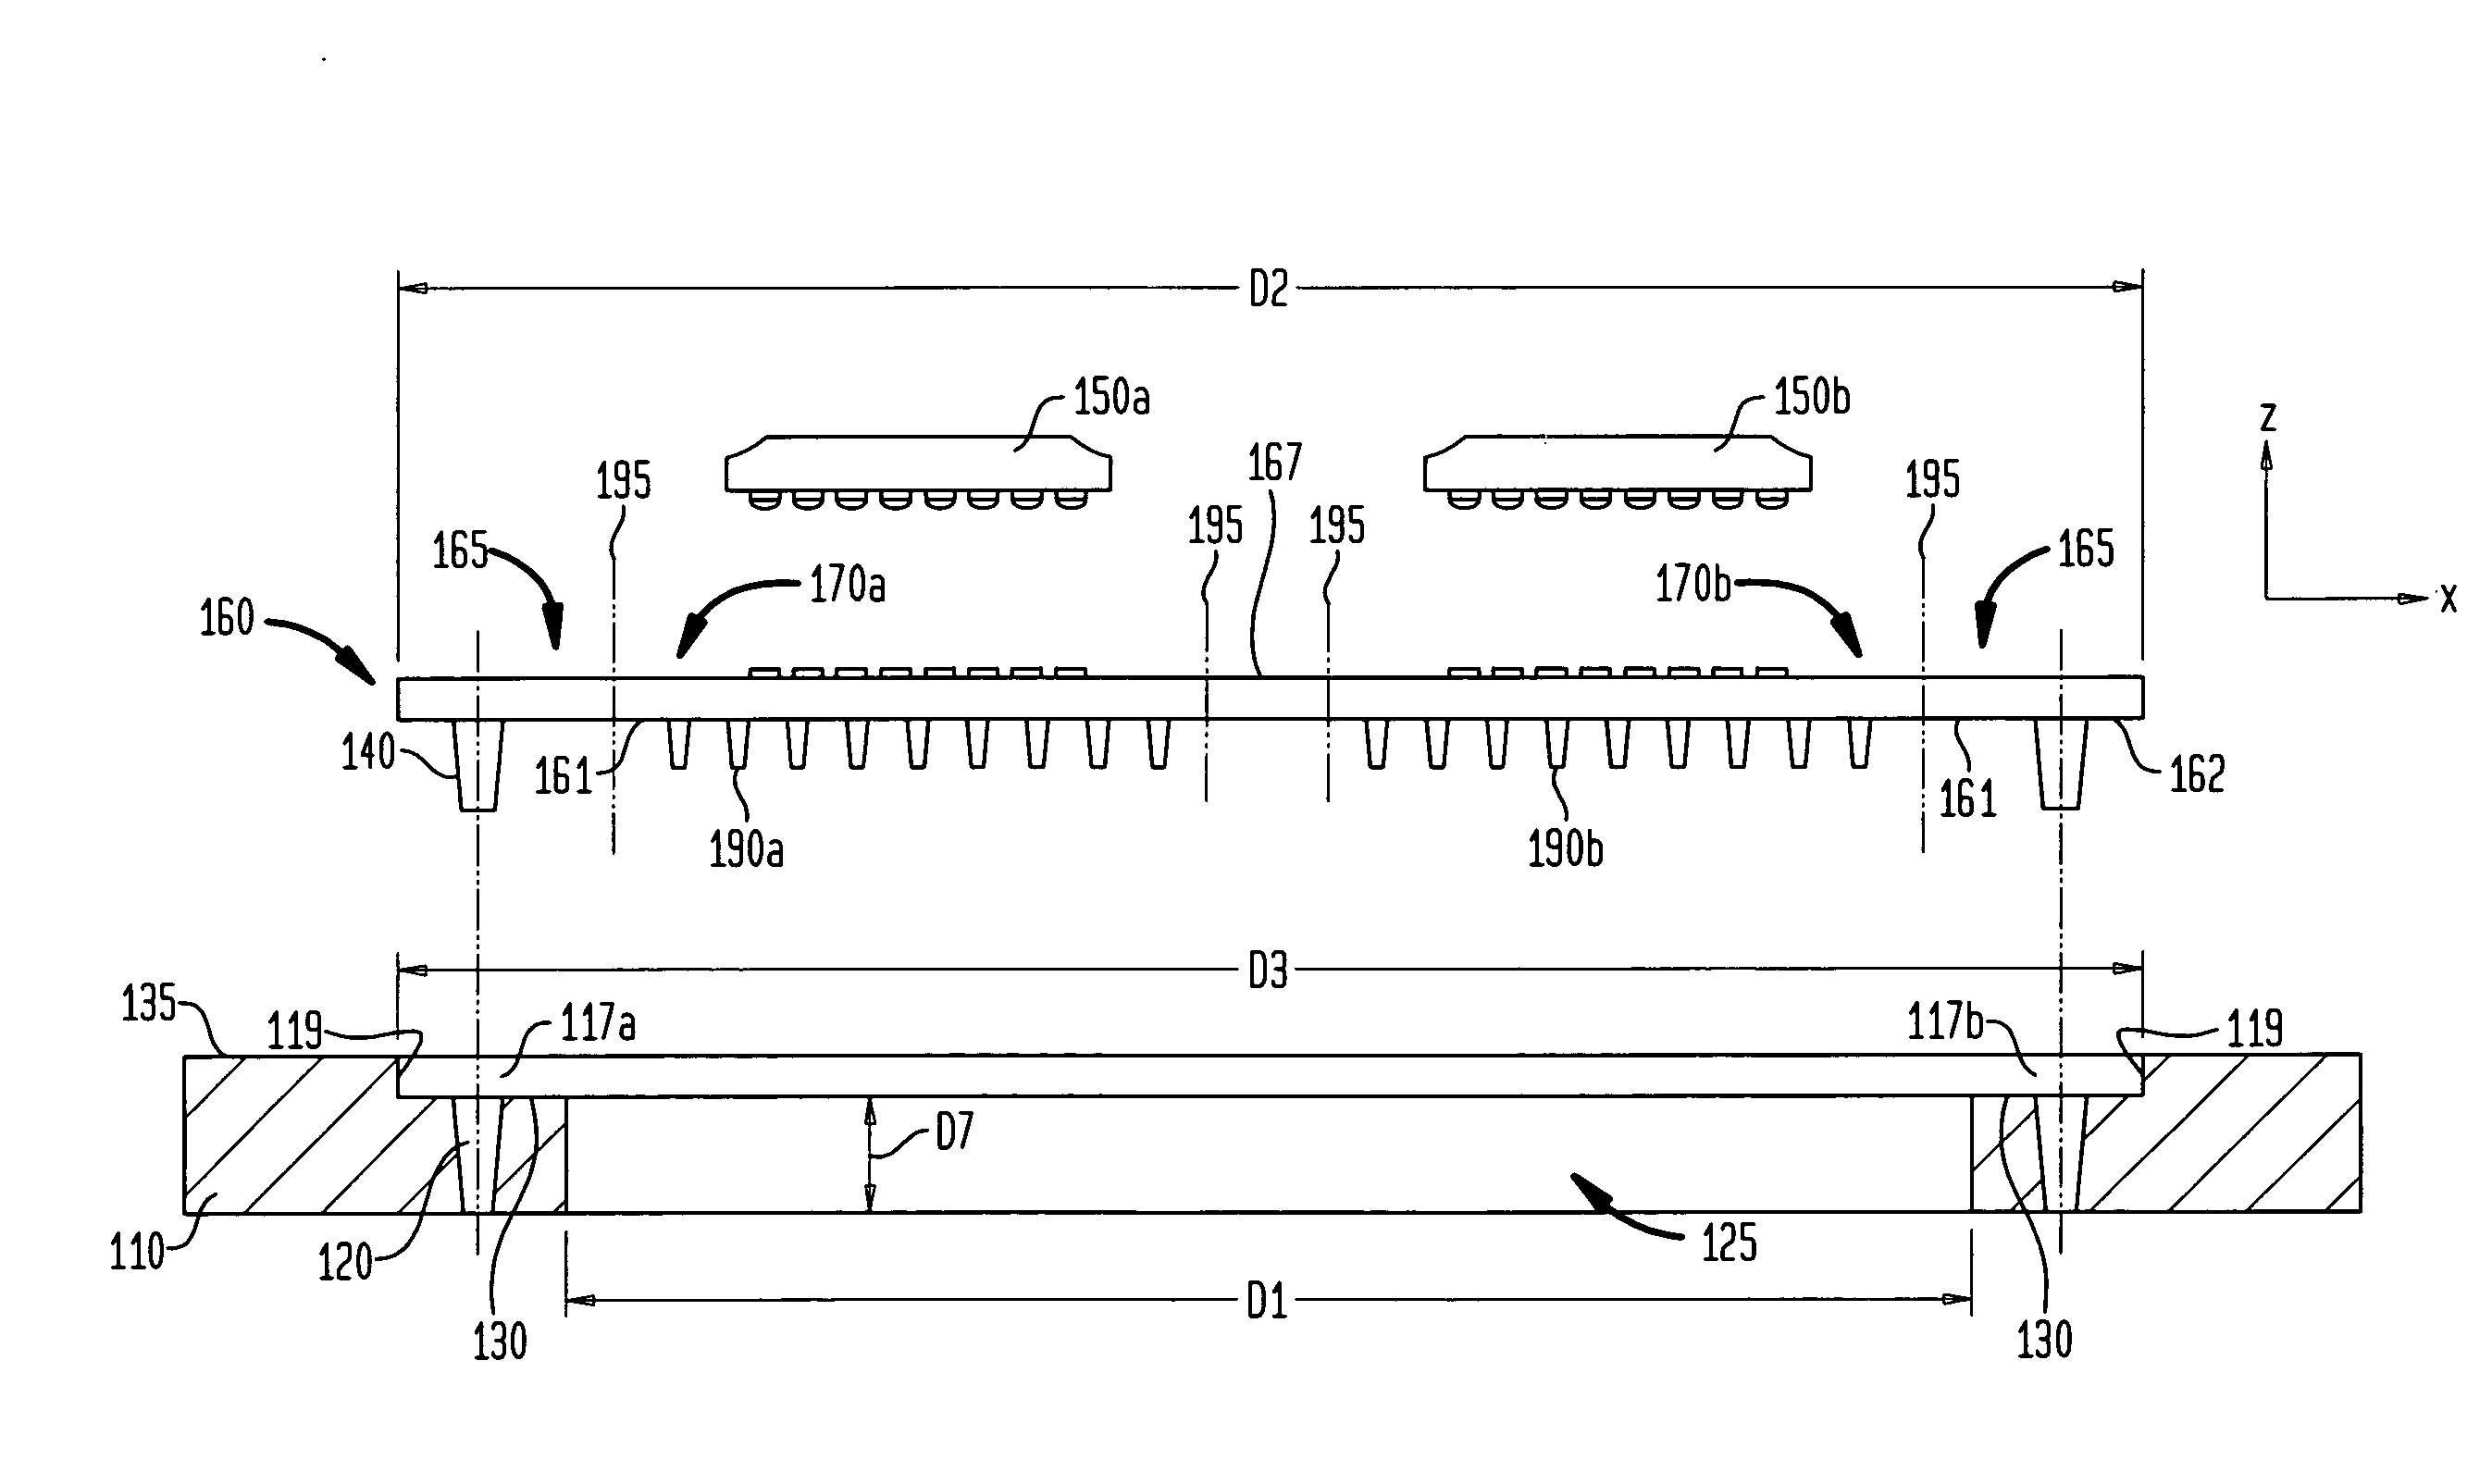 Alignment and cutting of microelectronic substrates